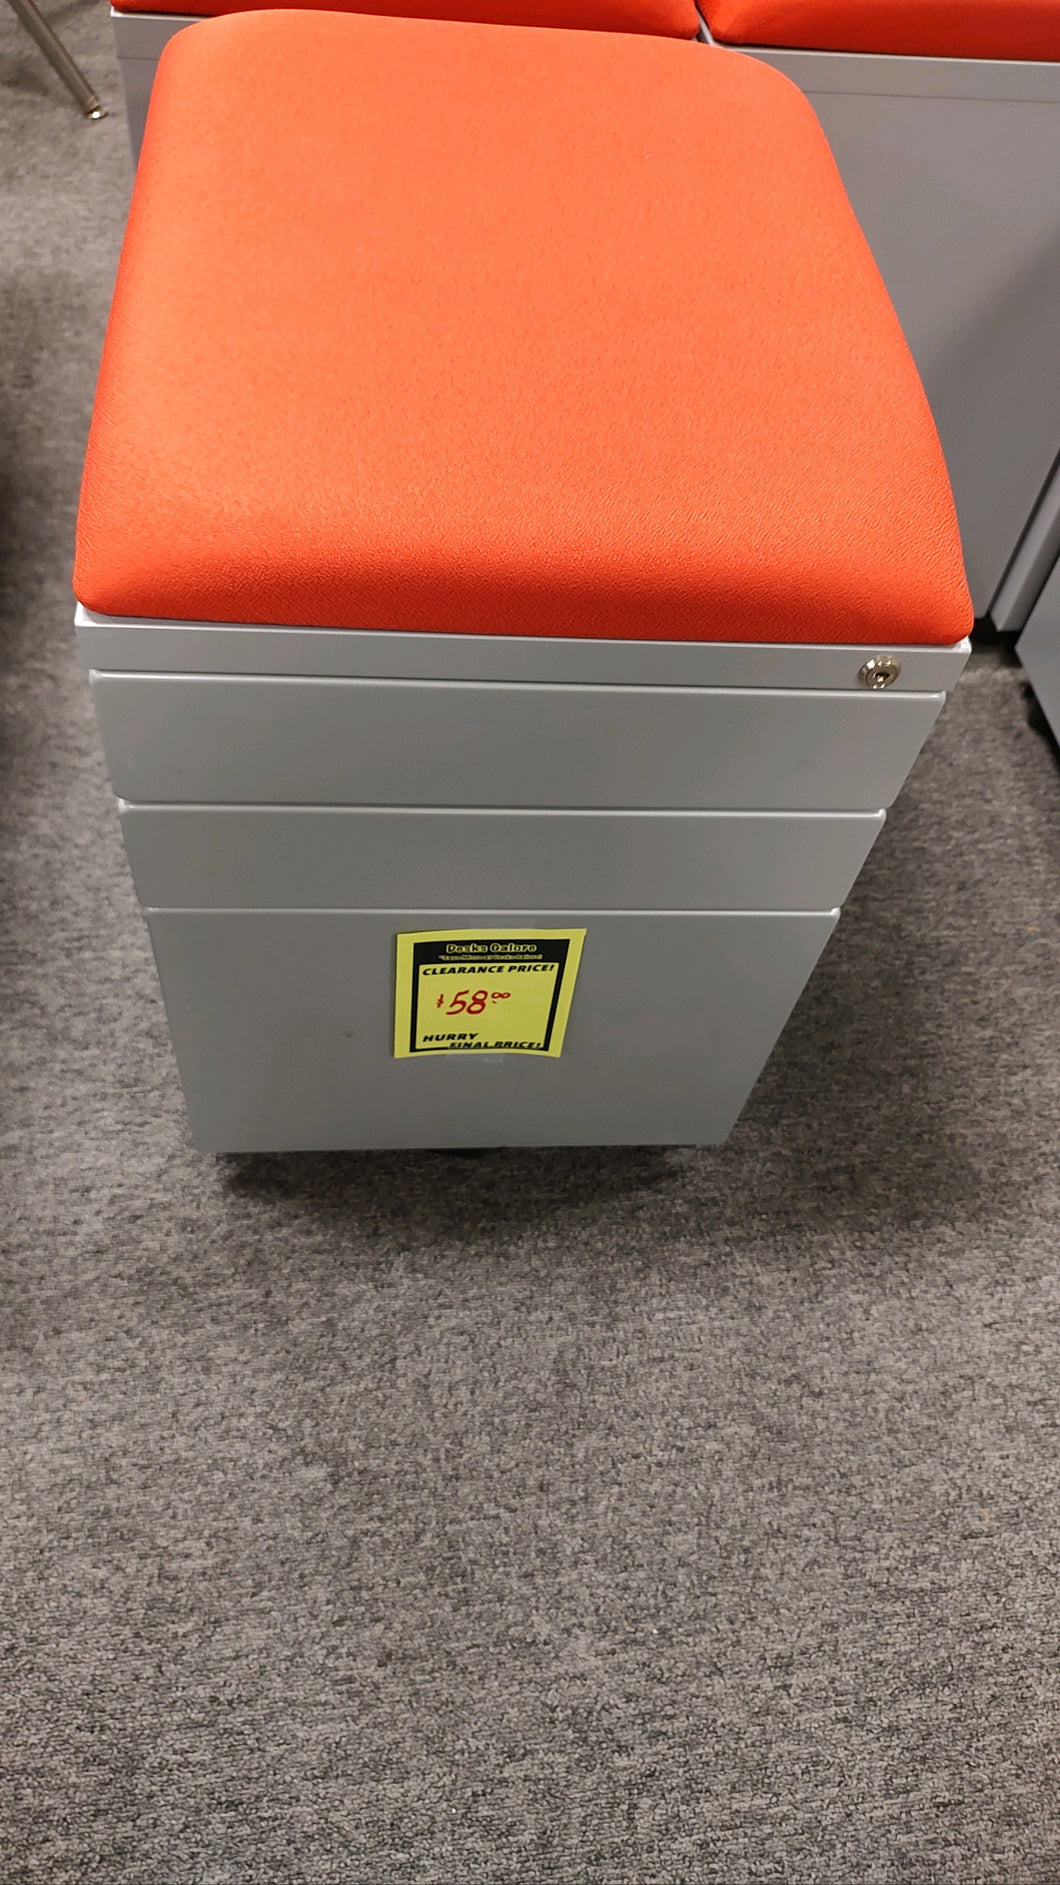 R4 Gray/Orange Bench Rolling 3 Drawer Used File $58.00 - 1 Only!